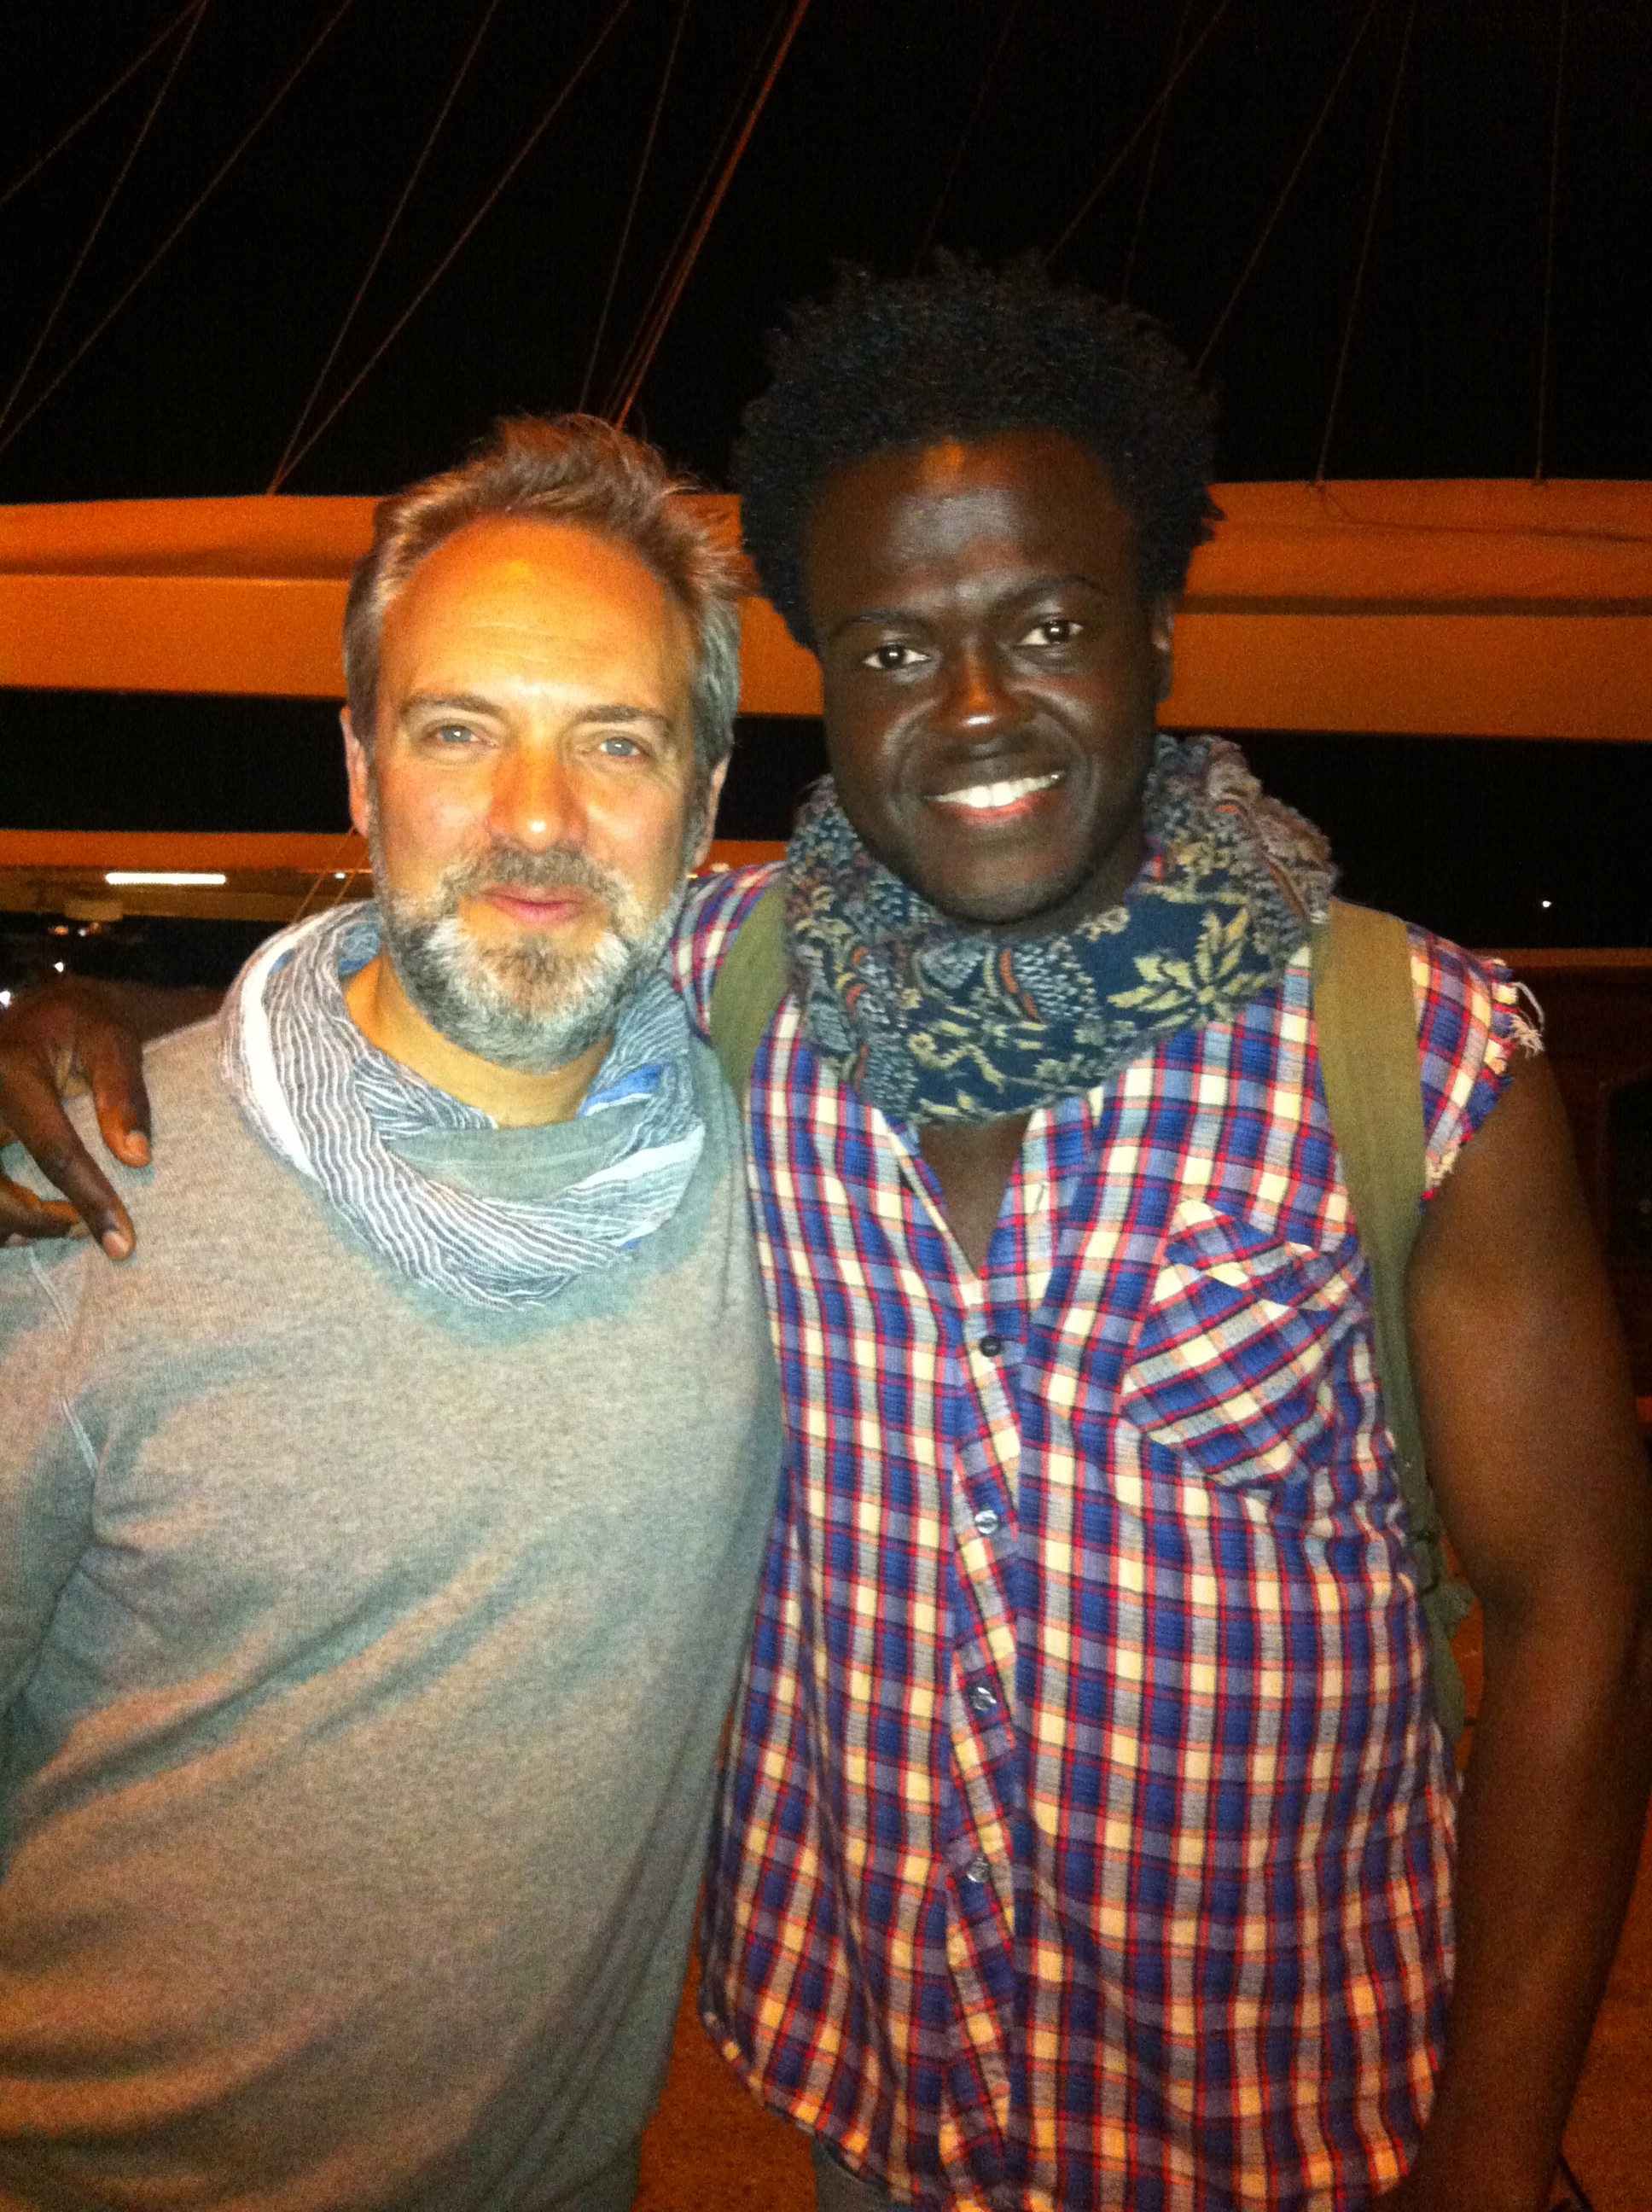 On Skyfall set in Turkey, with Sam Mendes